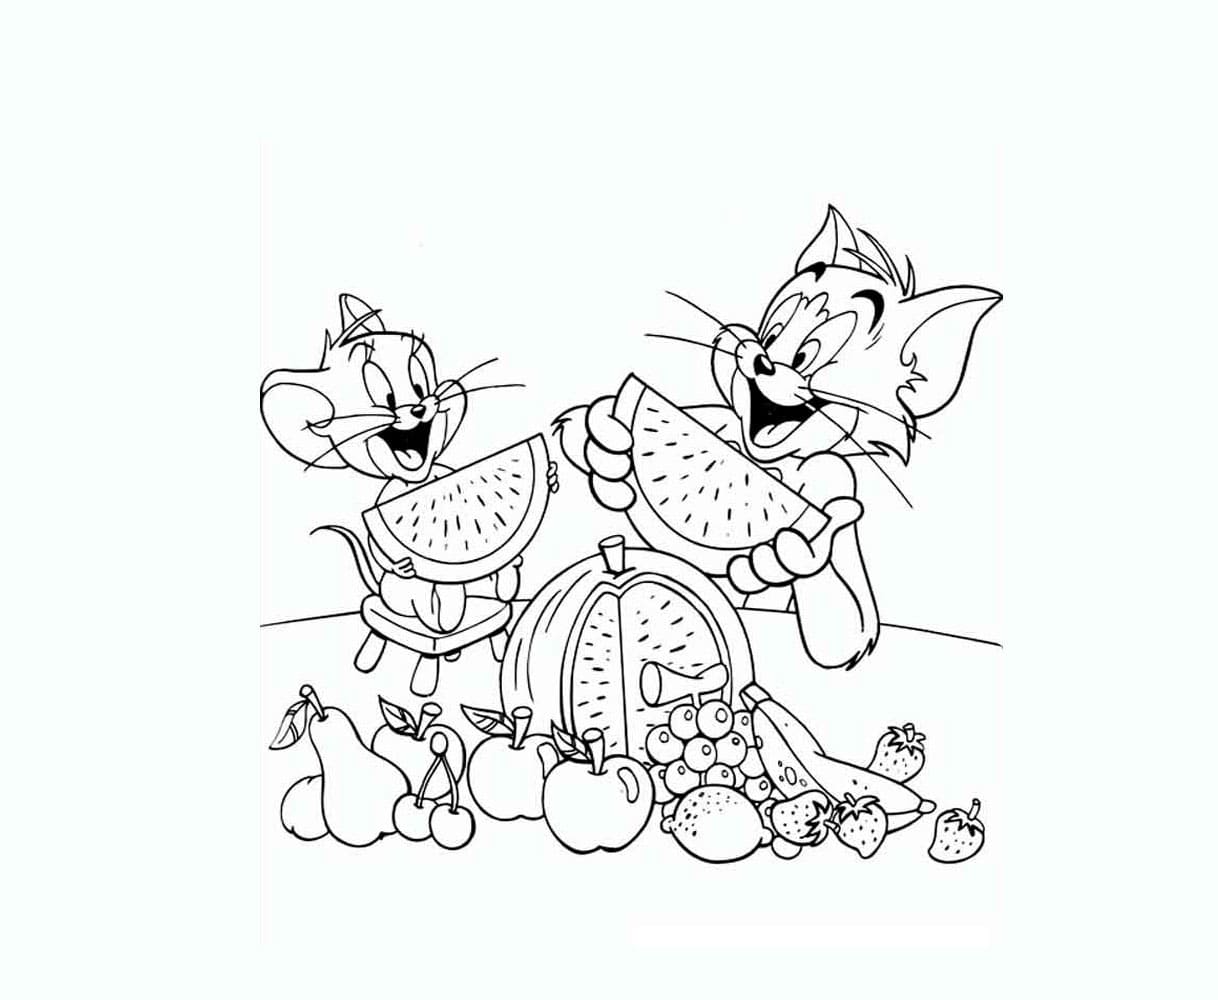 Tom et Jerry 1 coloring page